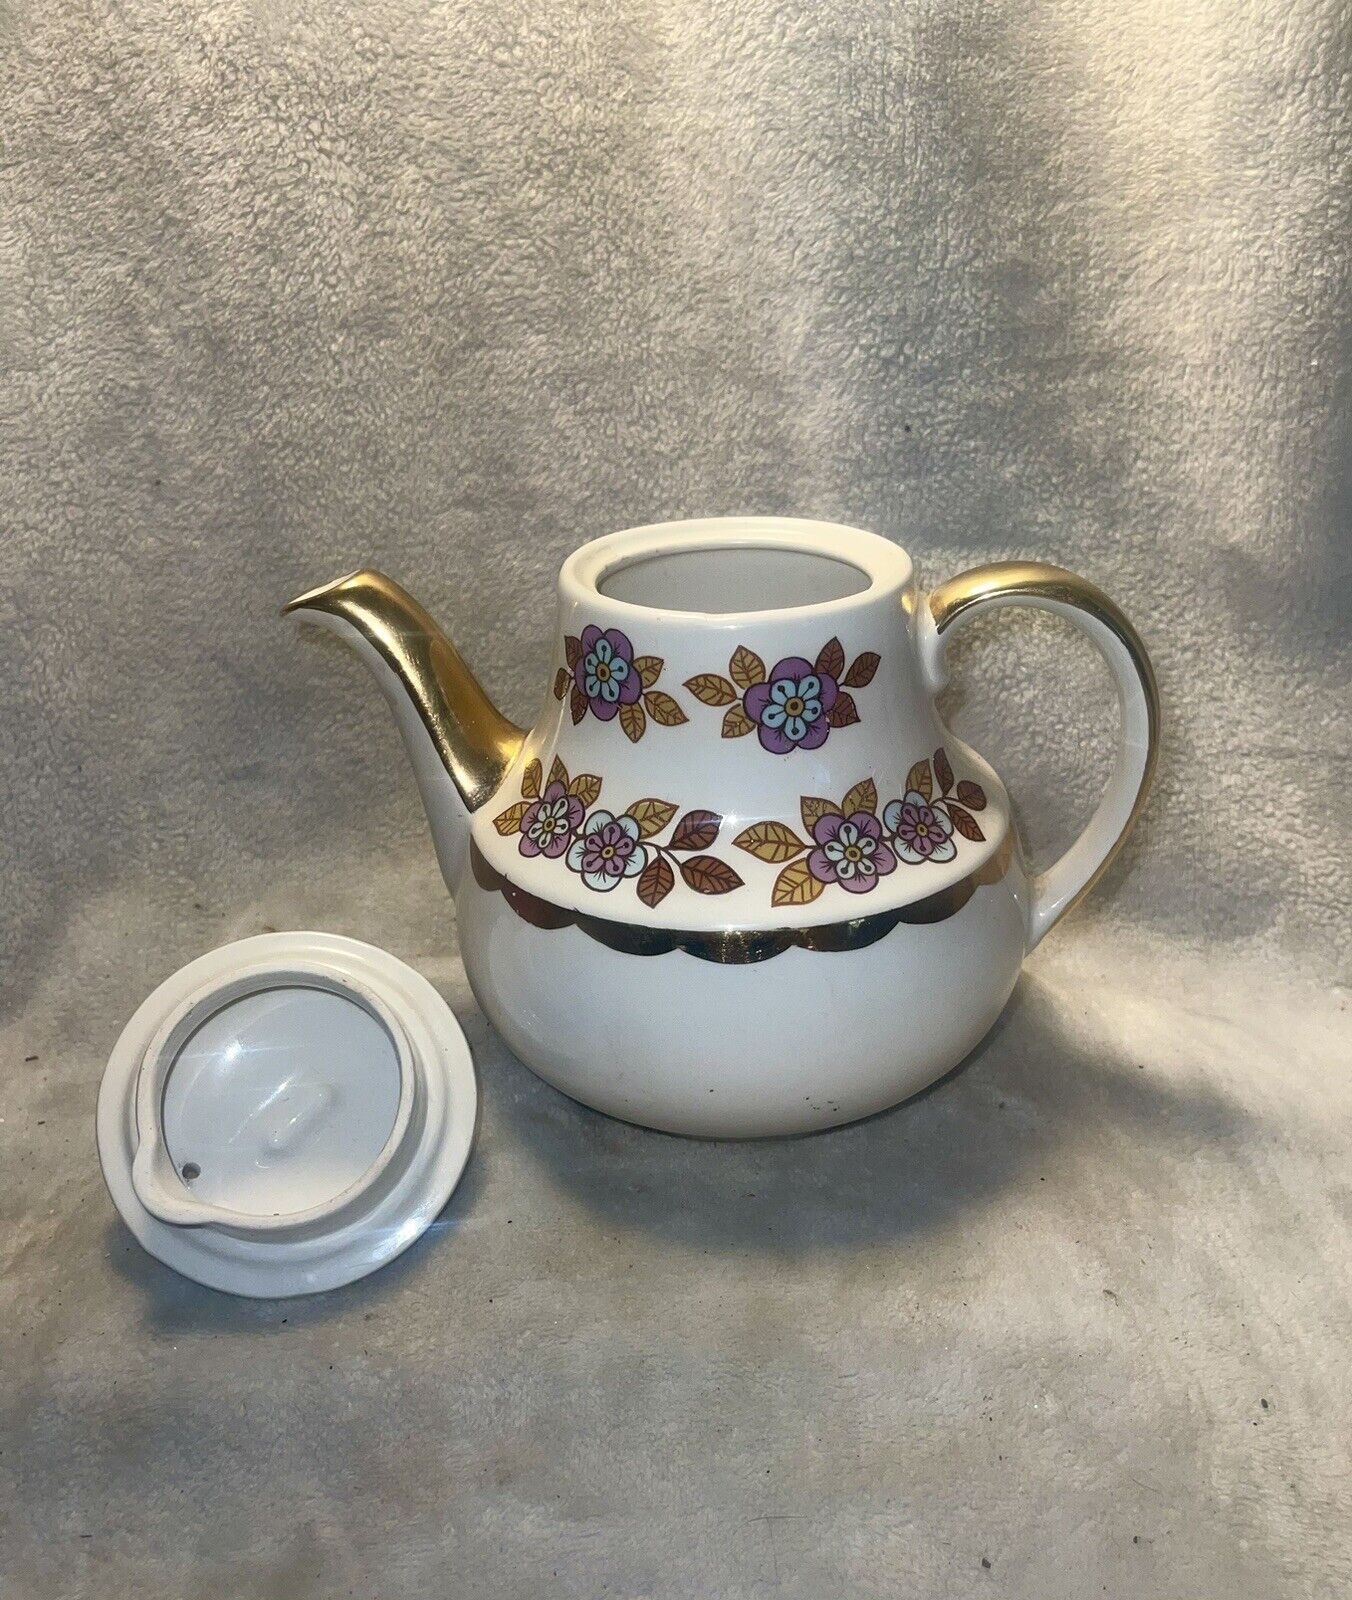 Vtg Gibson Teapot made in Staffordshire England “Blue Flowers and Gold” 